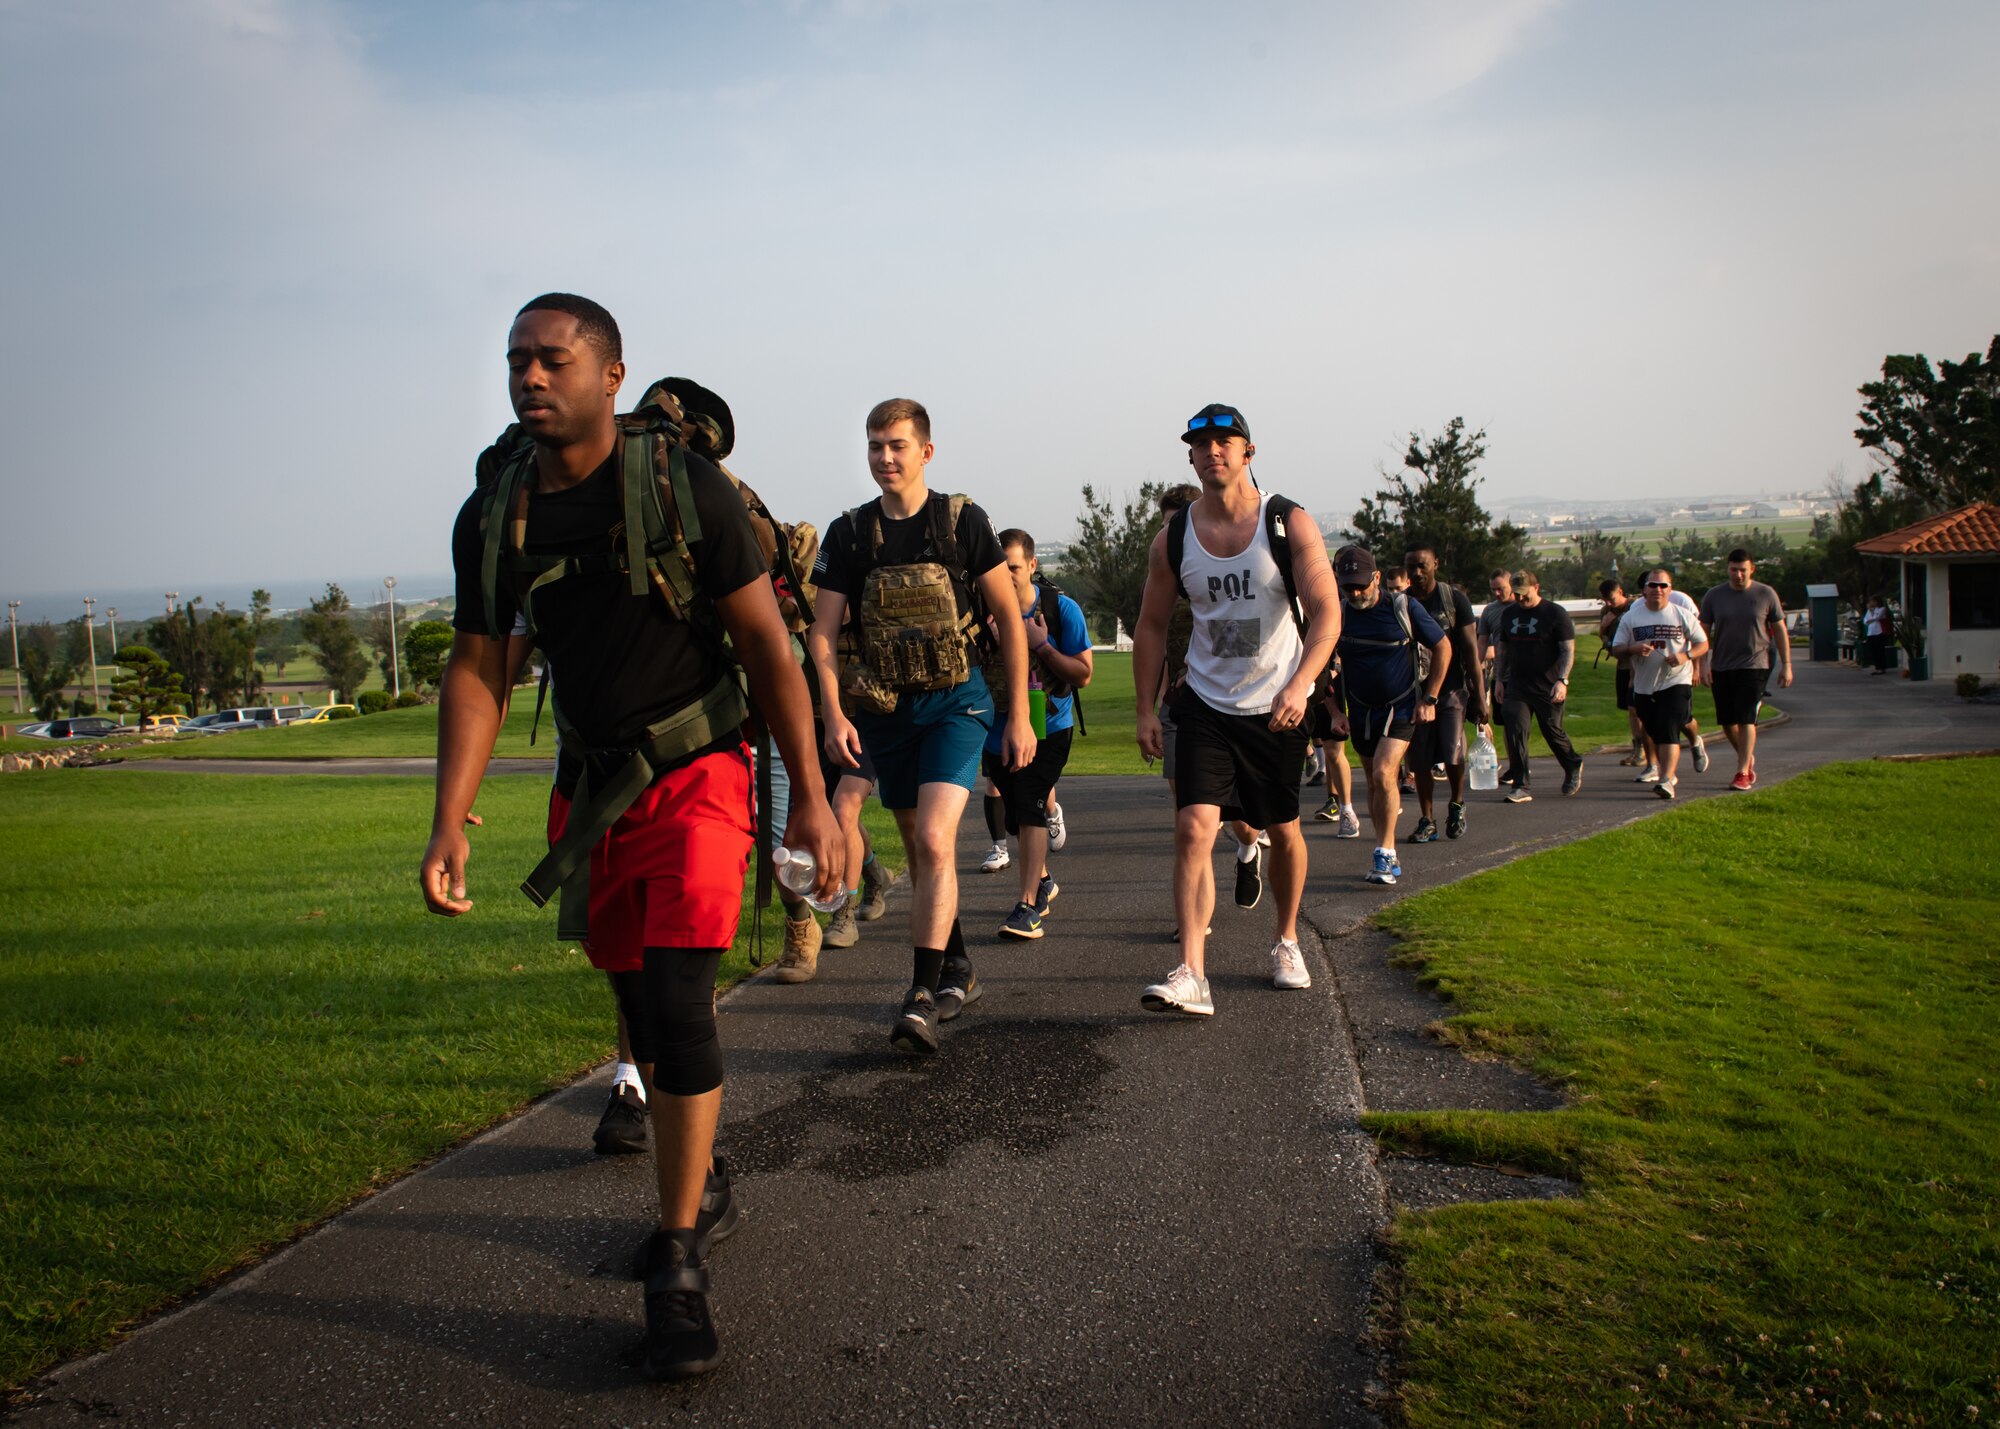 Participants hike around the Banyan Tree Golf Course during the Holocaust Remembrance Week Ruck March at Kadena Air Base, Japan, May 2, 2019.